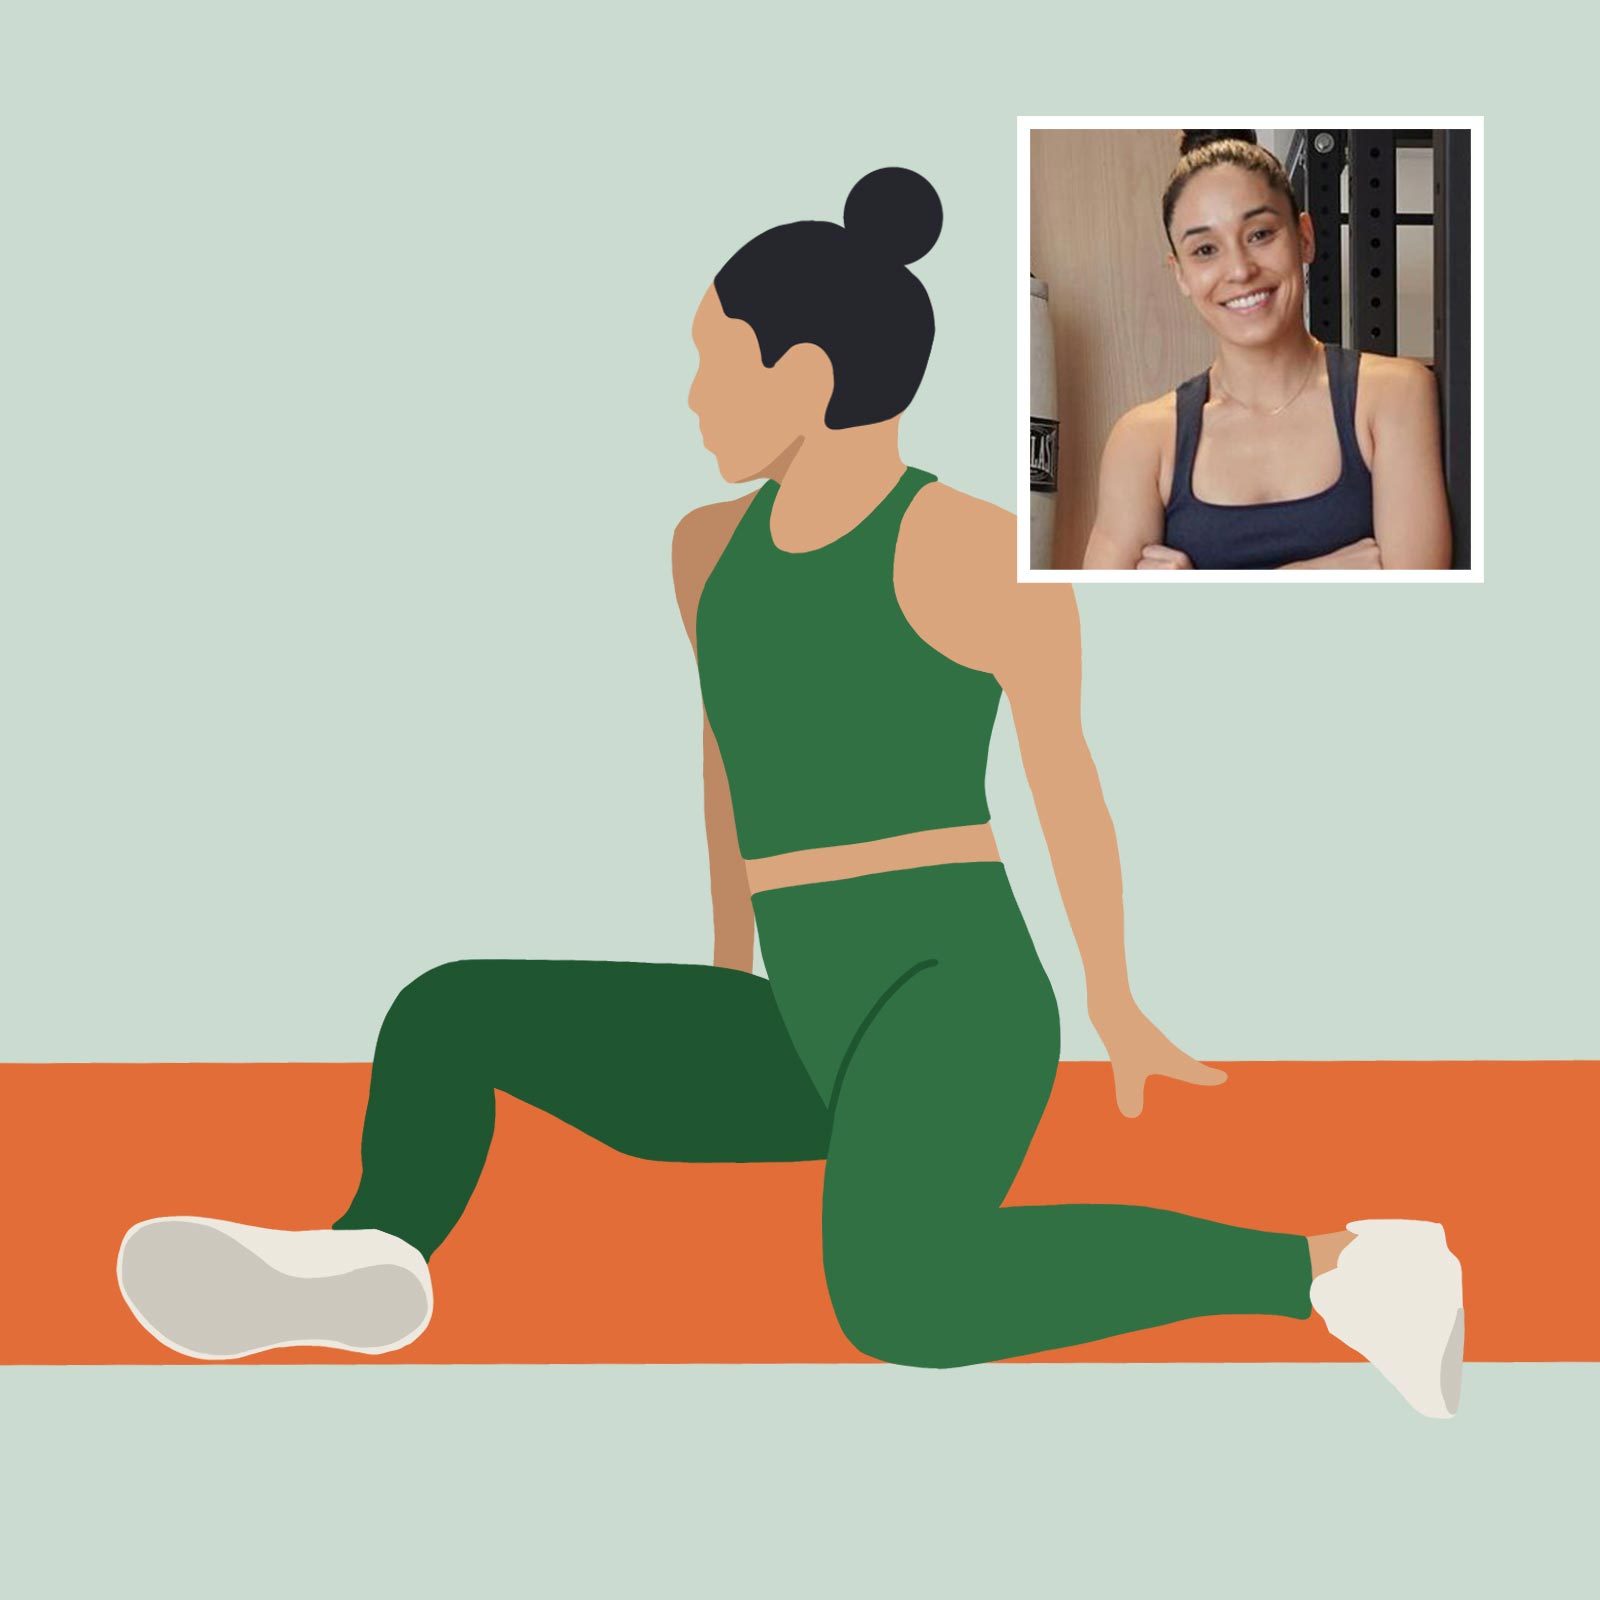 4 Gentle Mobility Exercises a Trainer Says You Should Be Doing